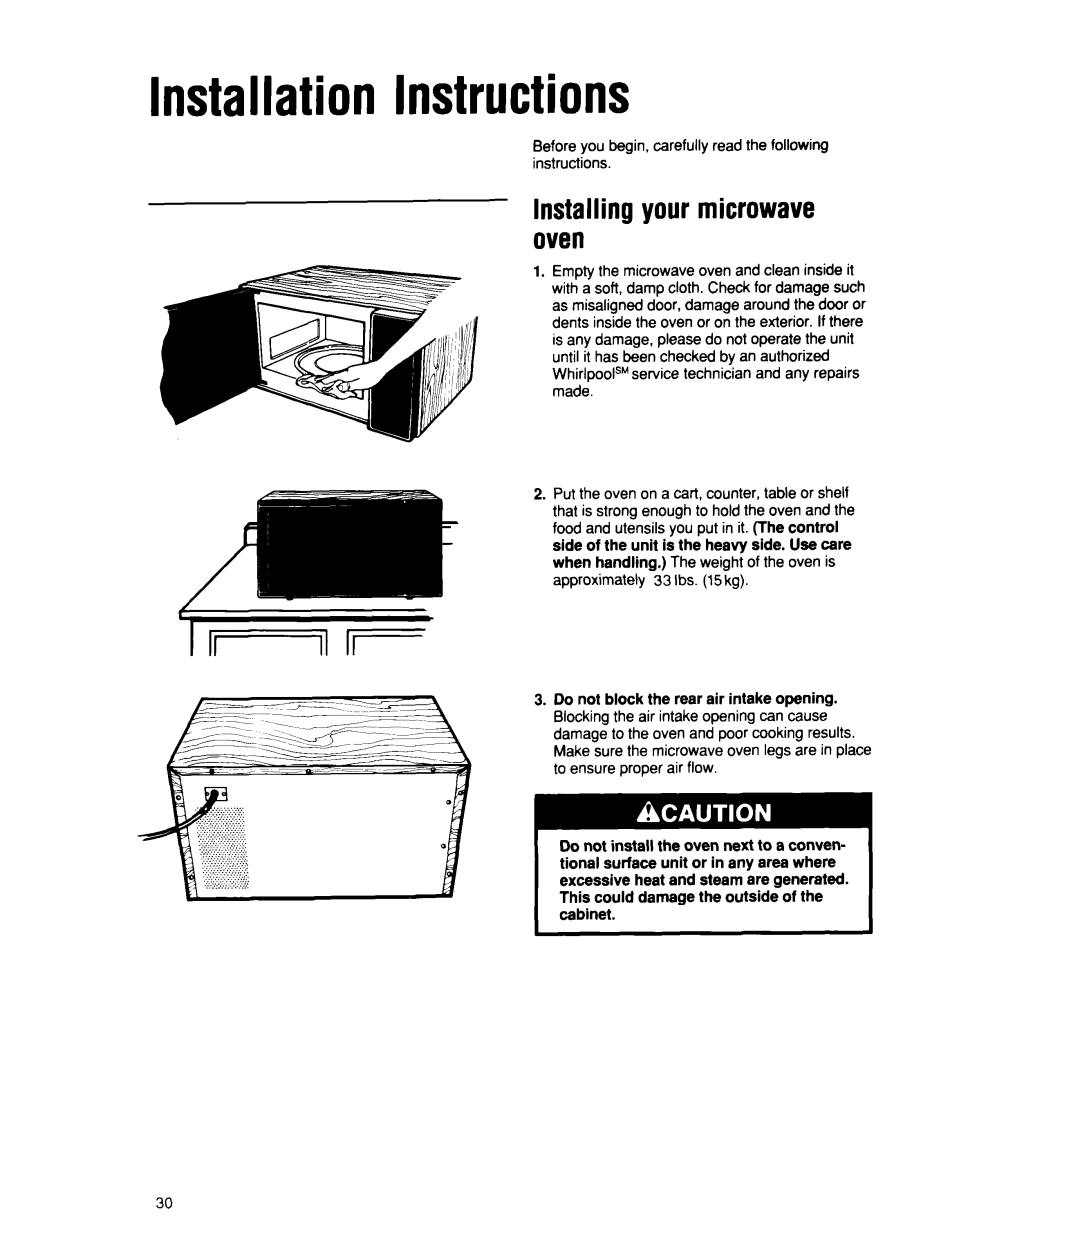 Whirlpool MT2150XW manual Installation Instructions, Installing your microwave oven 